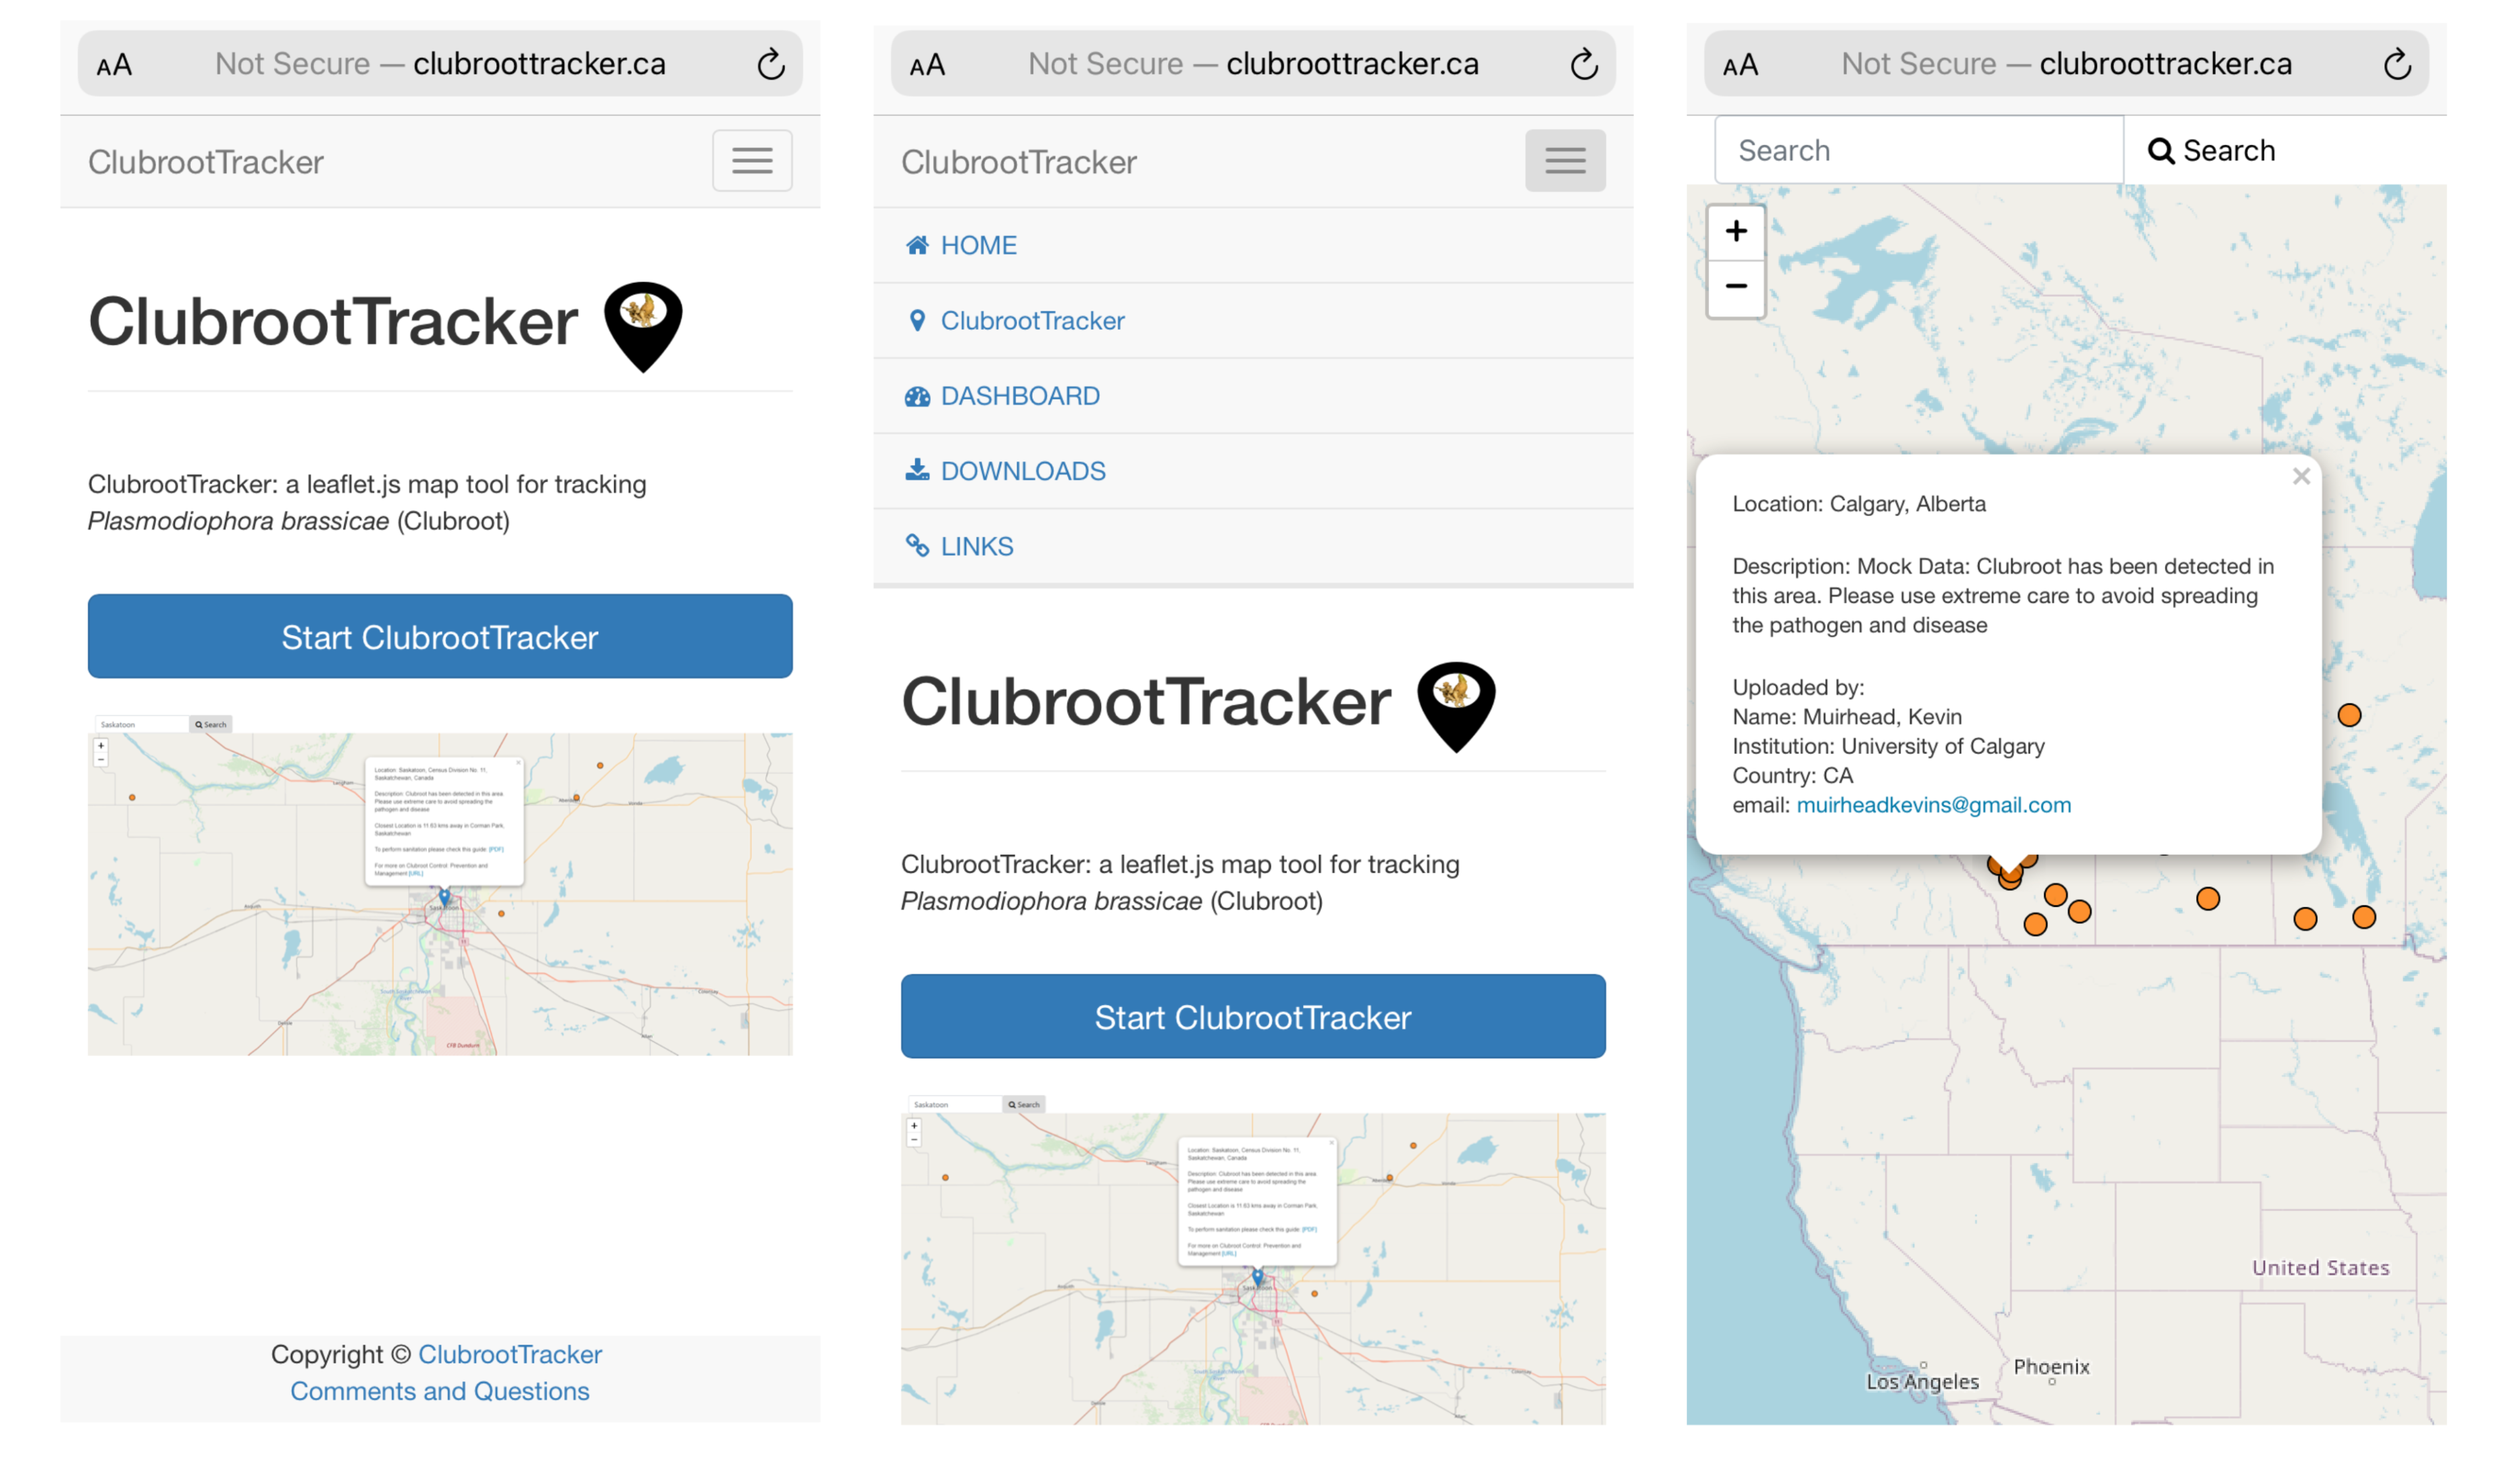 Screenshots of the ClubrootTracker tool showing the start page, menu and a selected location